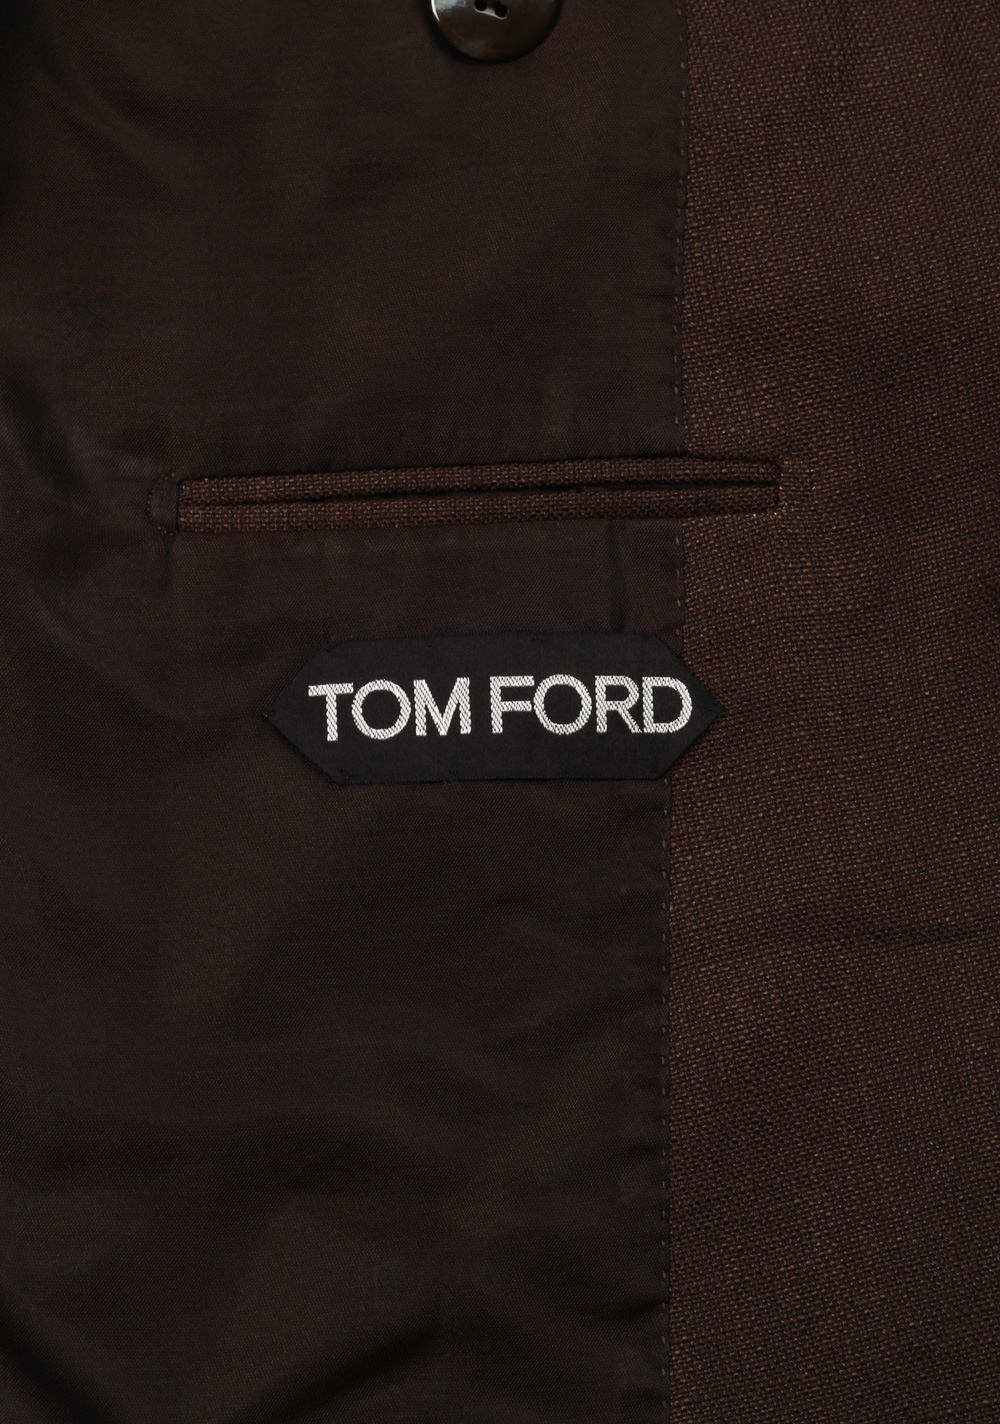 TOM FORD Shelton Double Breasted Brown Suit Size 46 / 36R U.S. Wool | Costume Limité